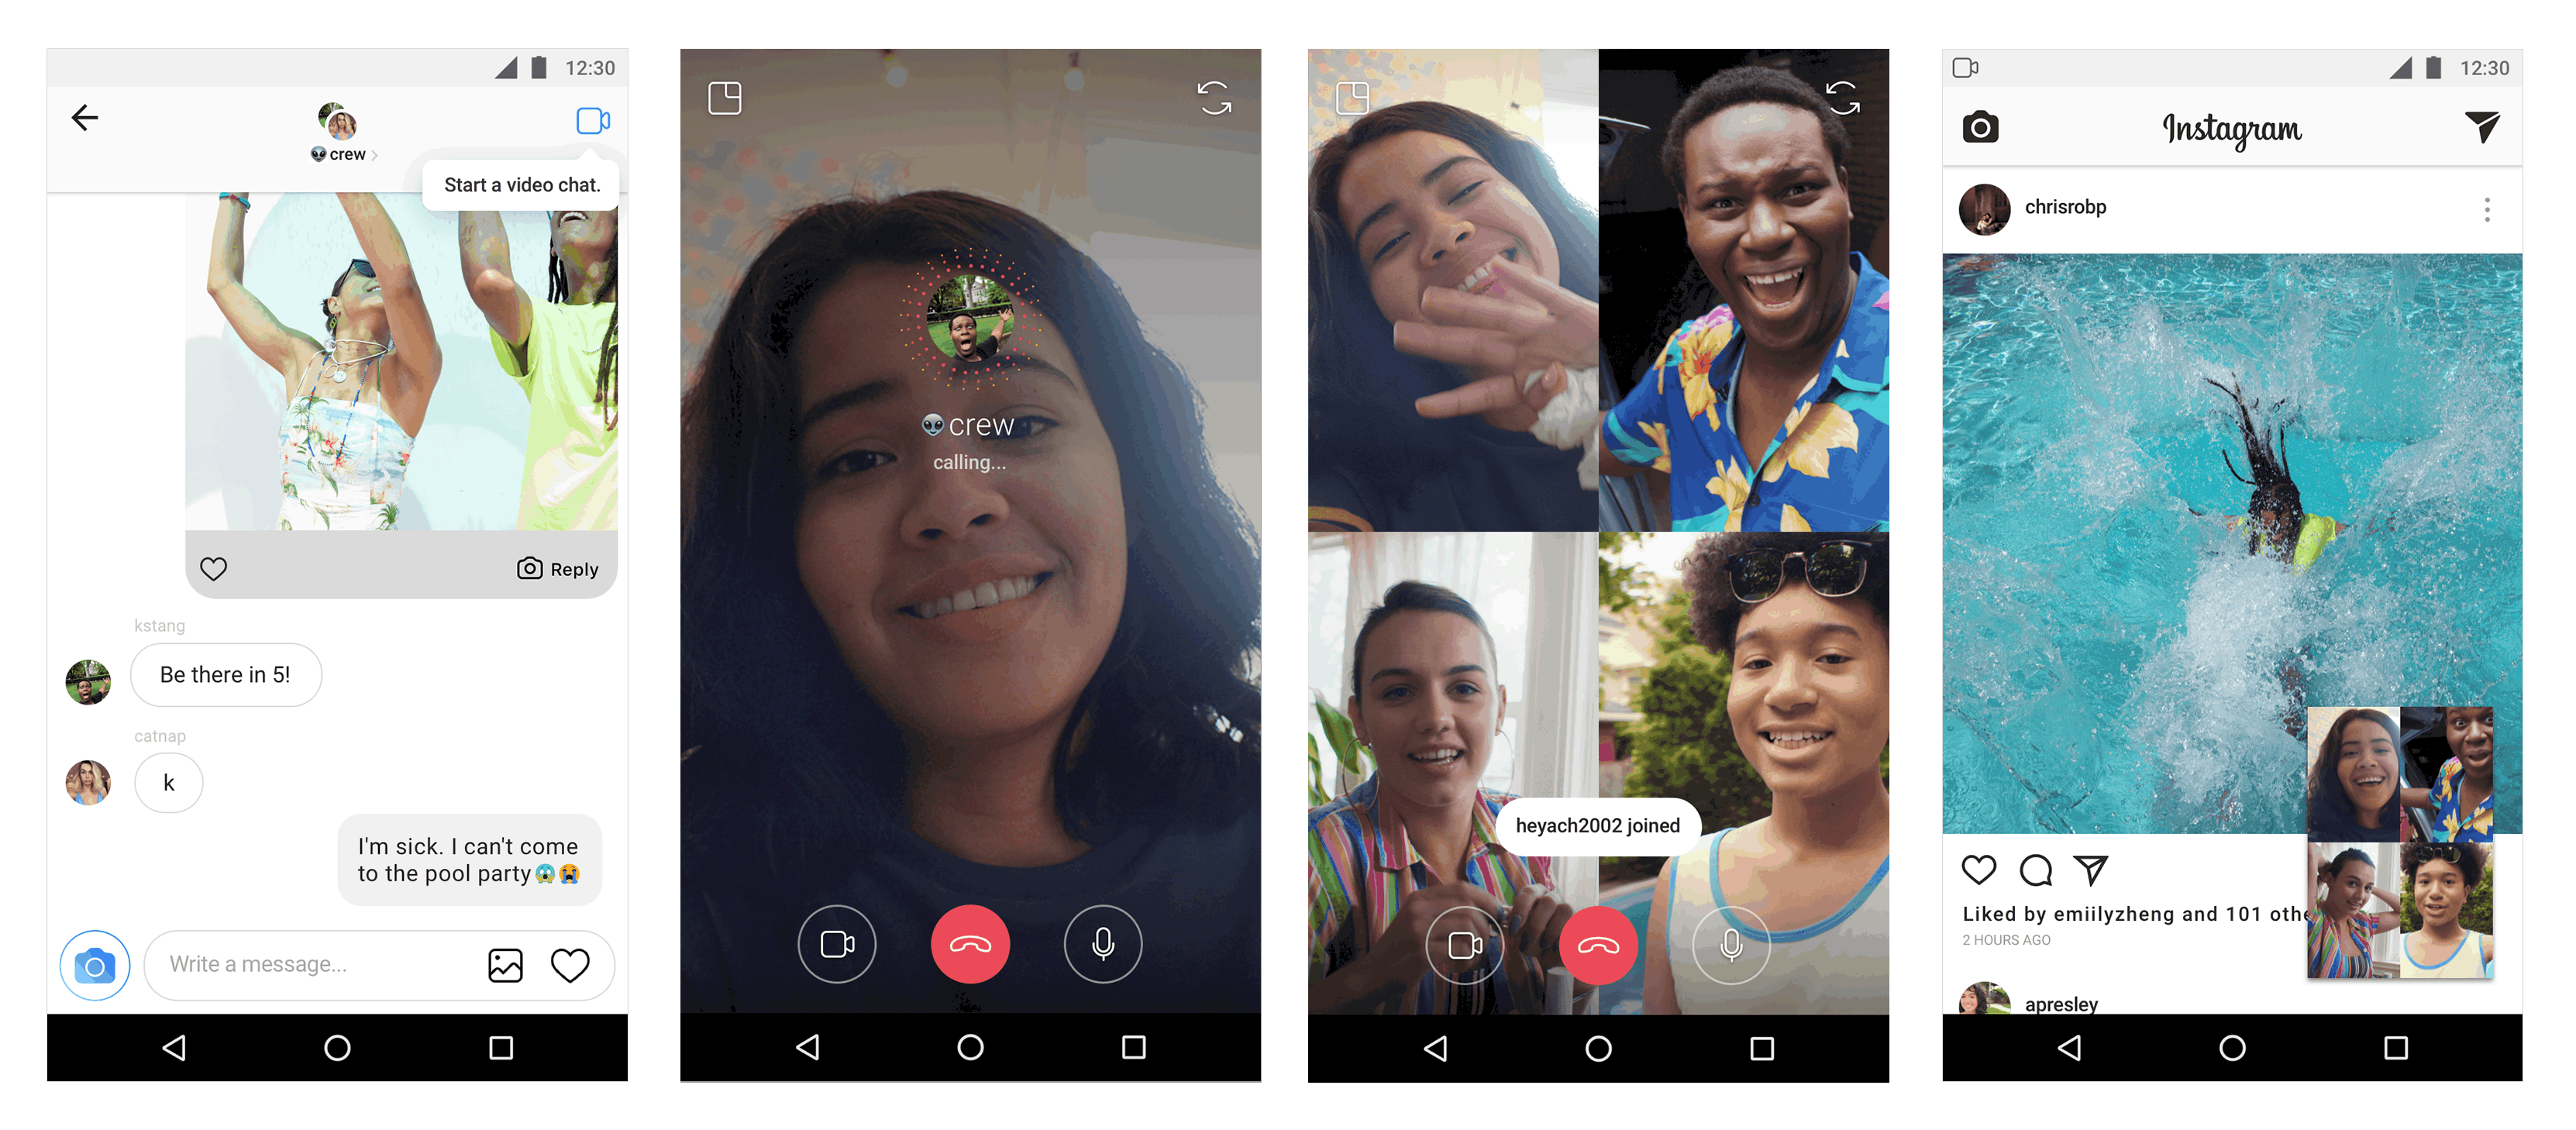 Instagram Video Calling Not Working? Here's why